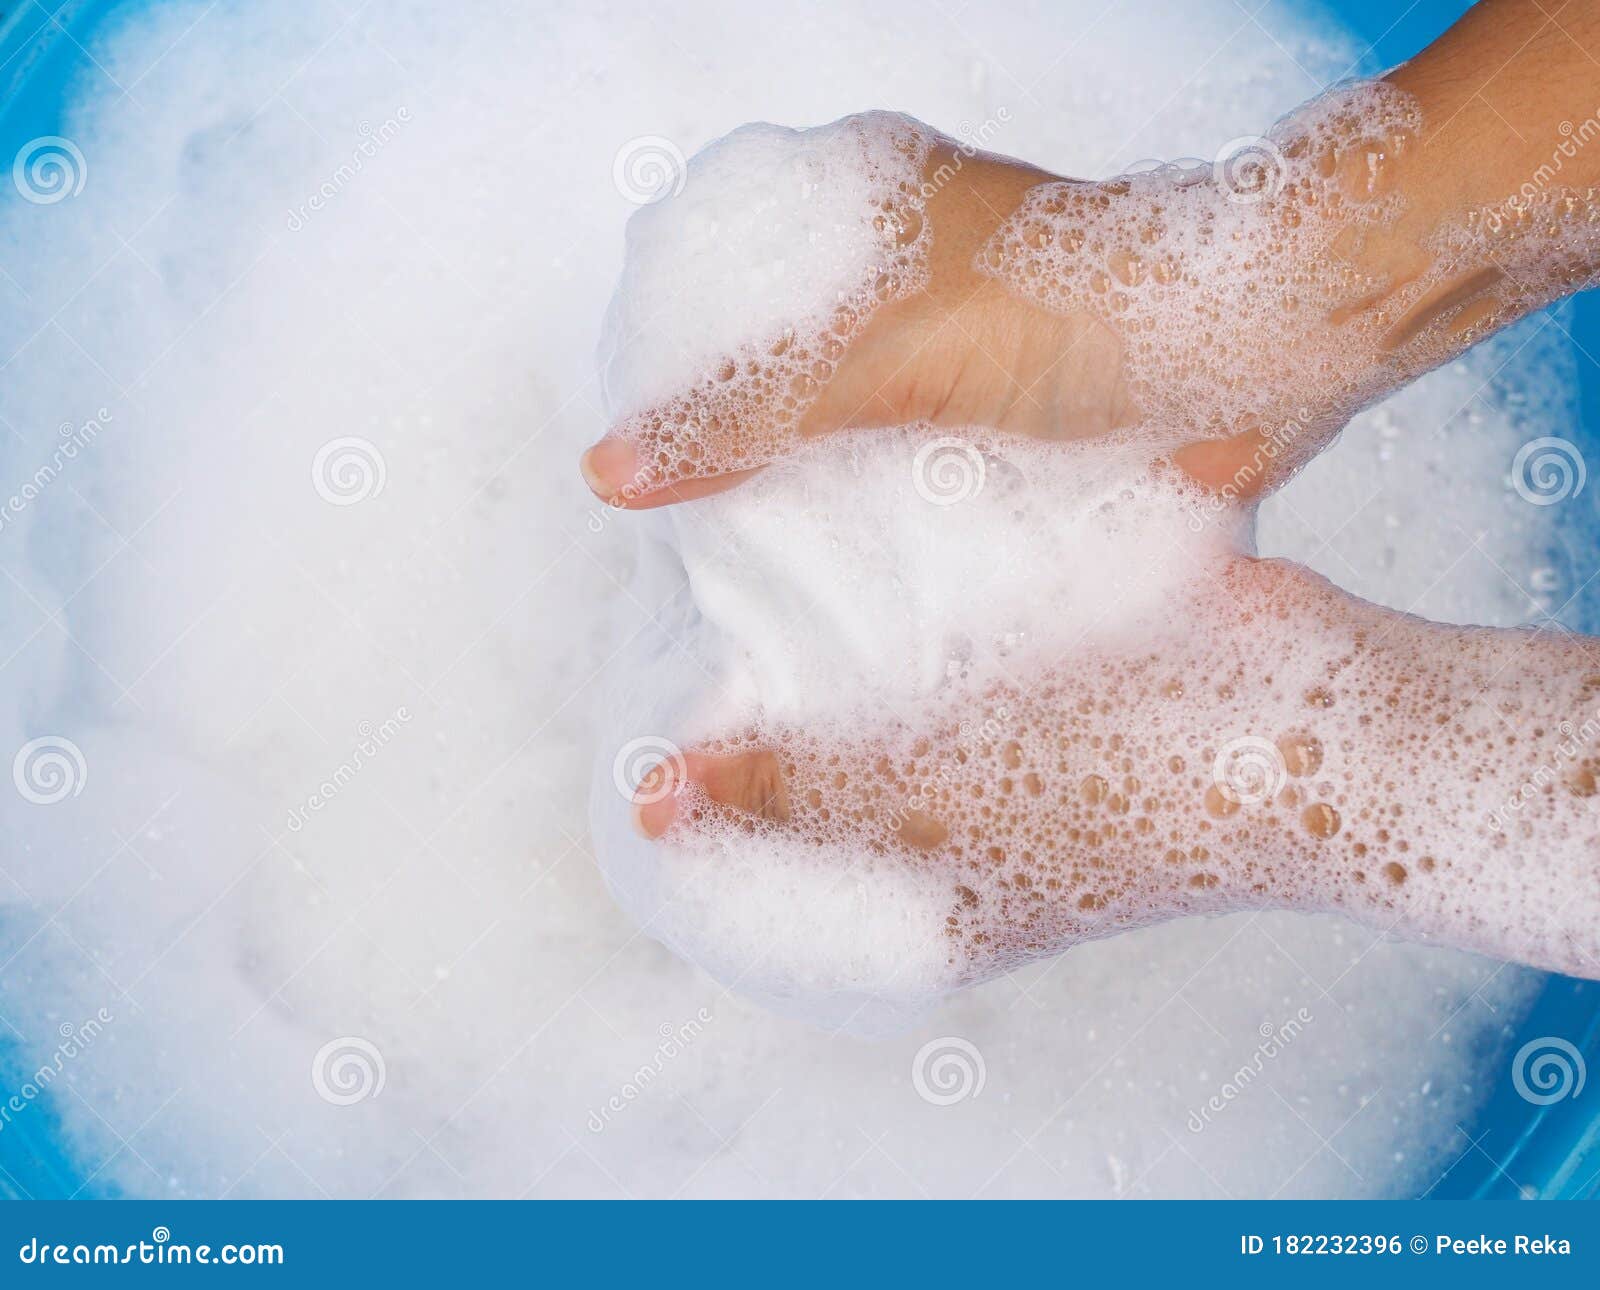 wash white clothes and soak cloth in laundry detergent water in tub washing.